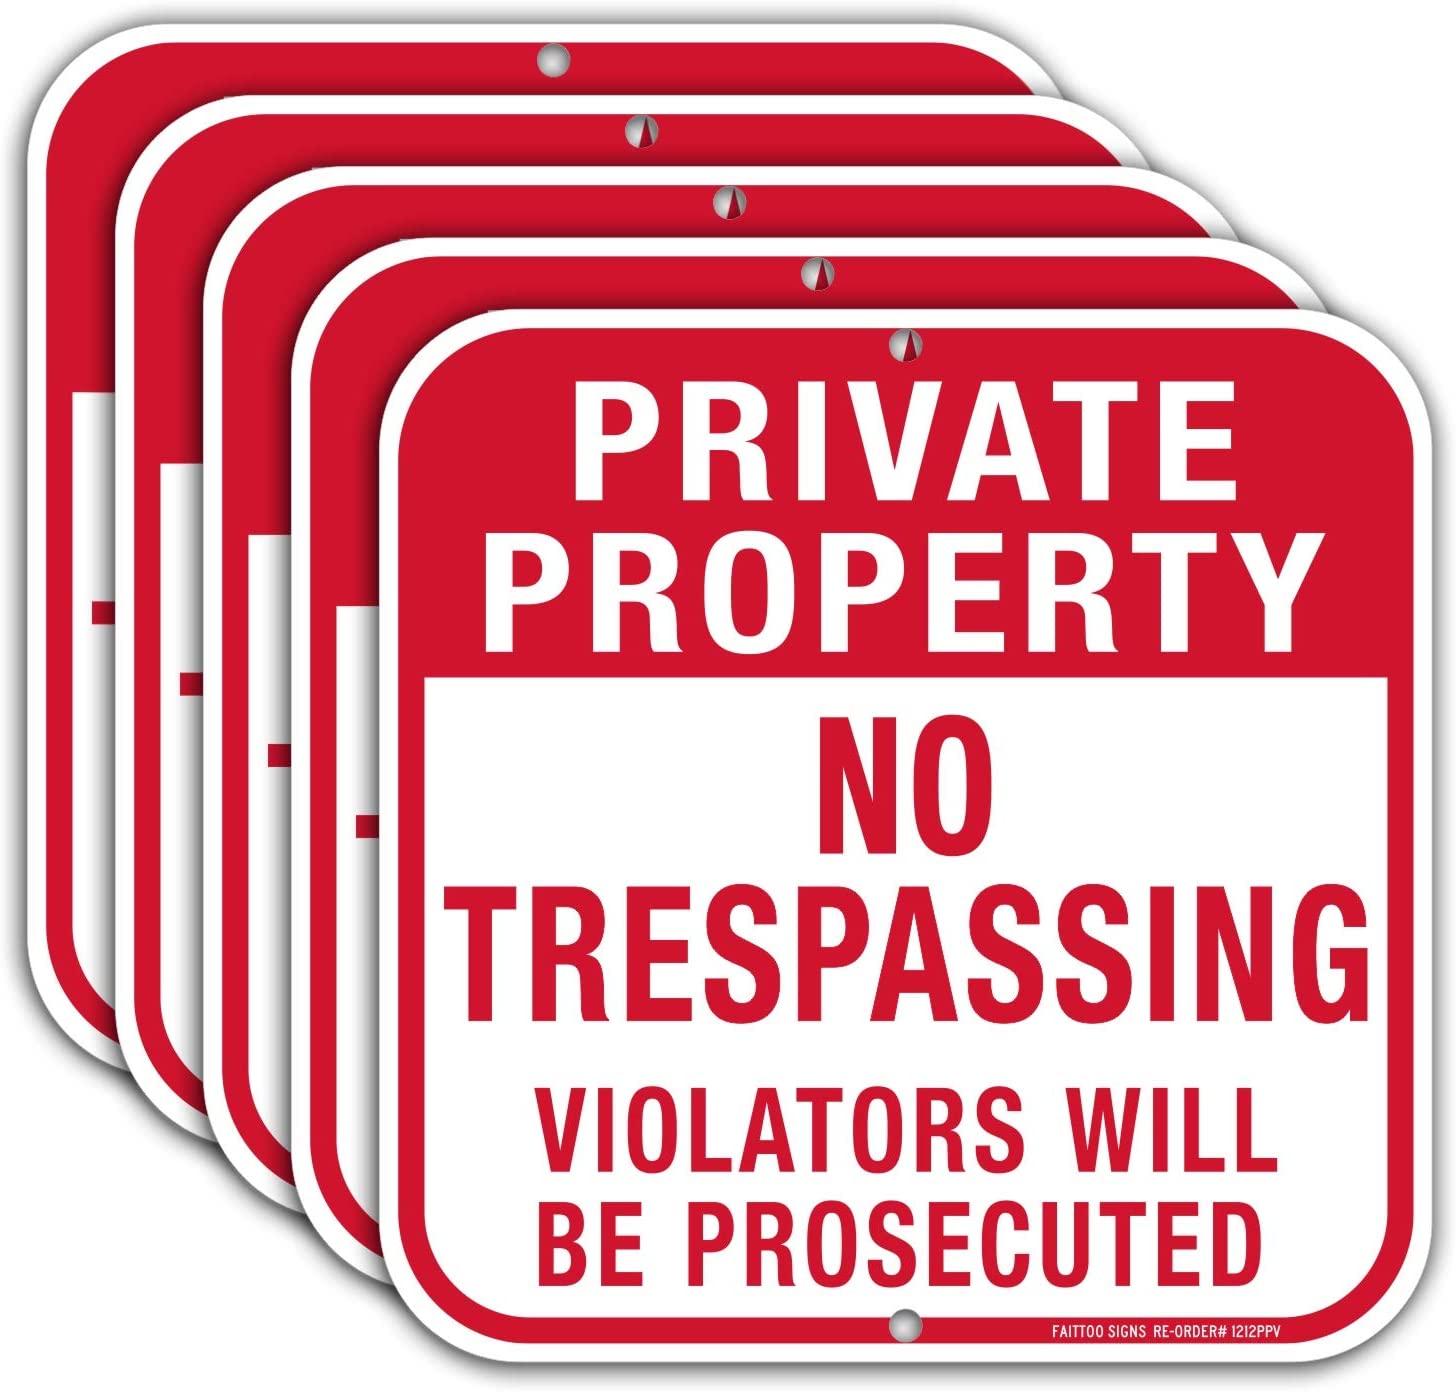 Private Property No Trespassing Sign, Violators Will Be Prosecuted Sign, 12 x 12 Inches Square, .040 Rust Free Aluminum, UV Protected and Waterproof, Weather Resistant, Durable Ink, Easy to Mount